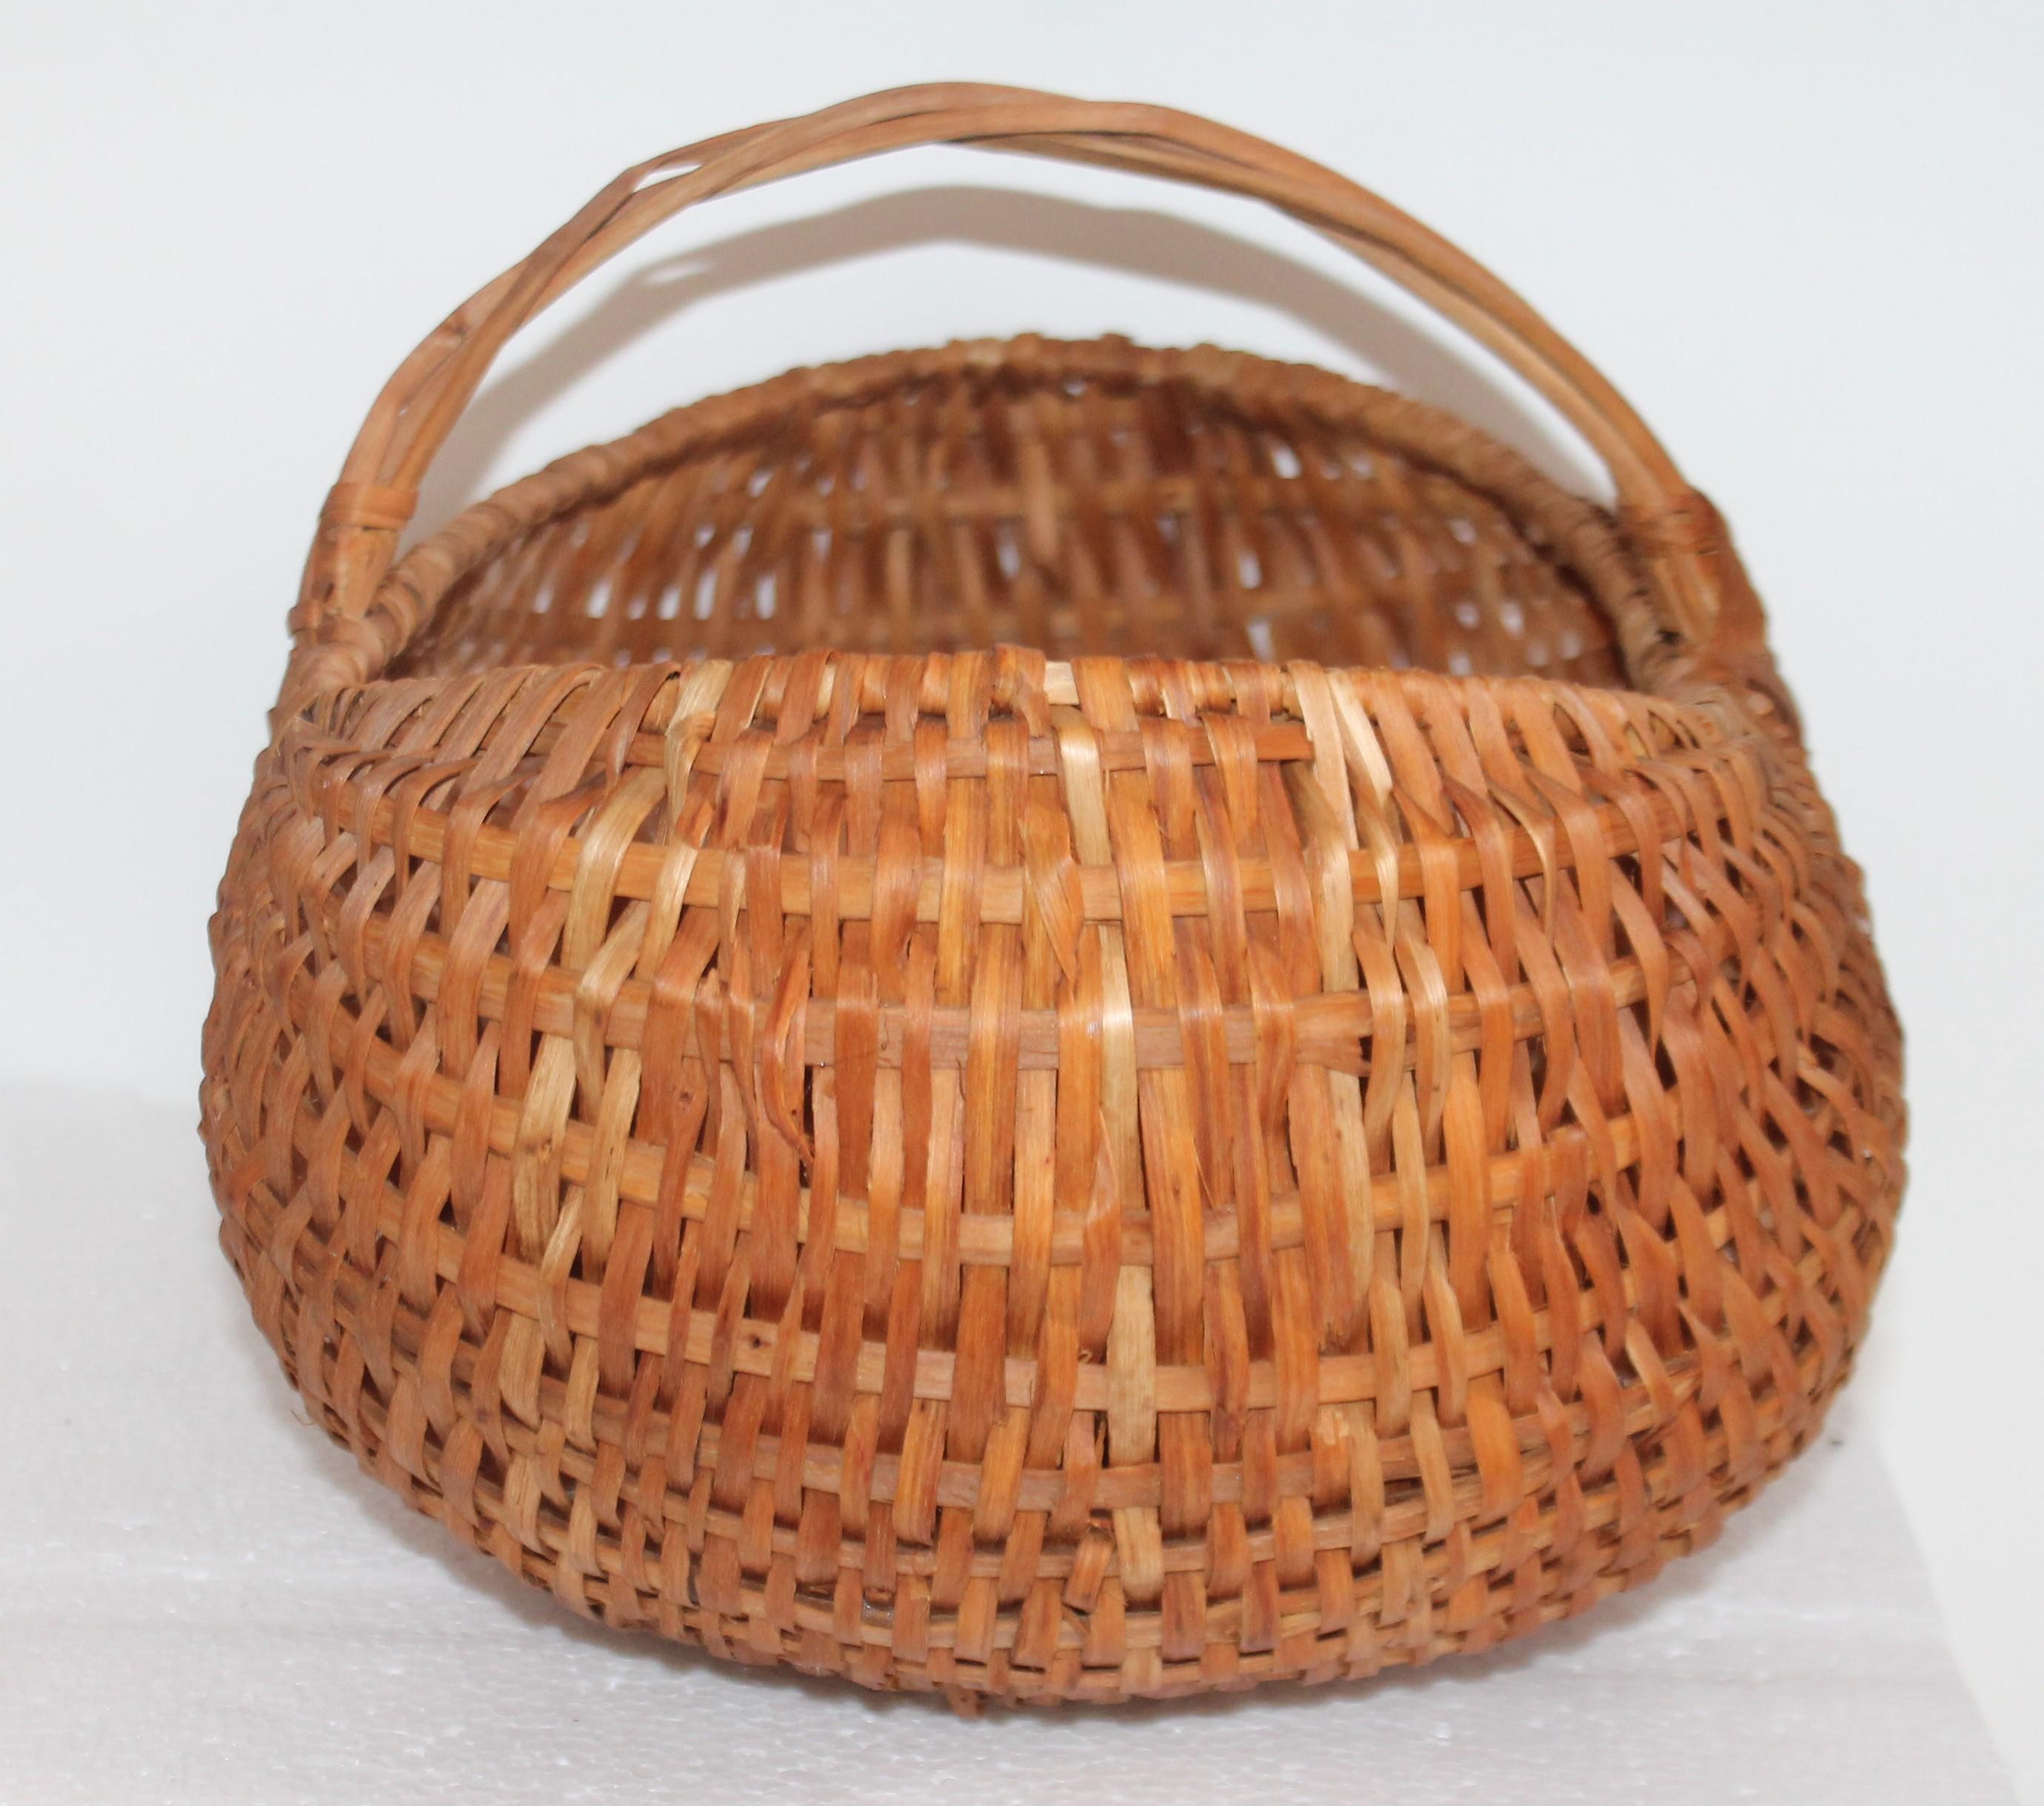 This fine all original surface natural buttocks basket. Handwoven double butt hickory basket with twisted handle. The condition is very good.